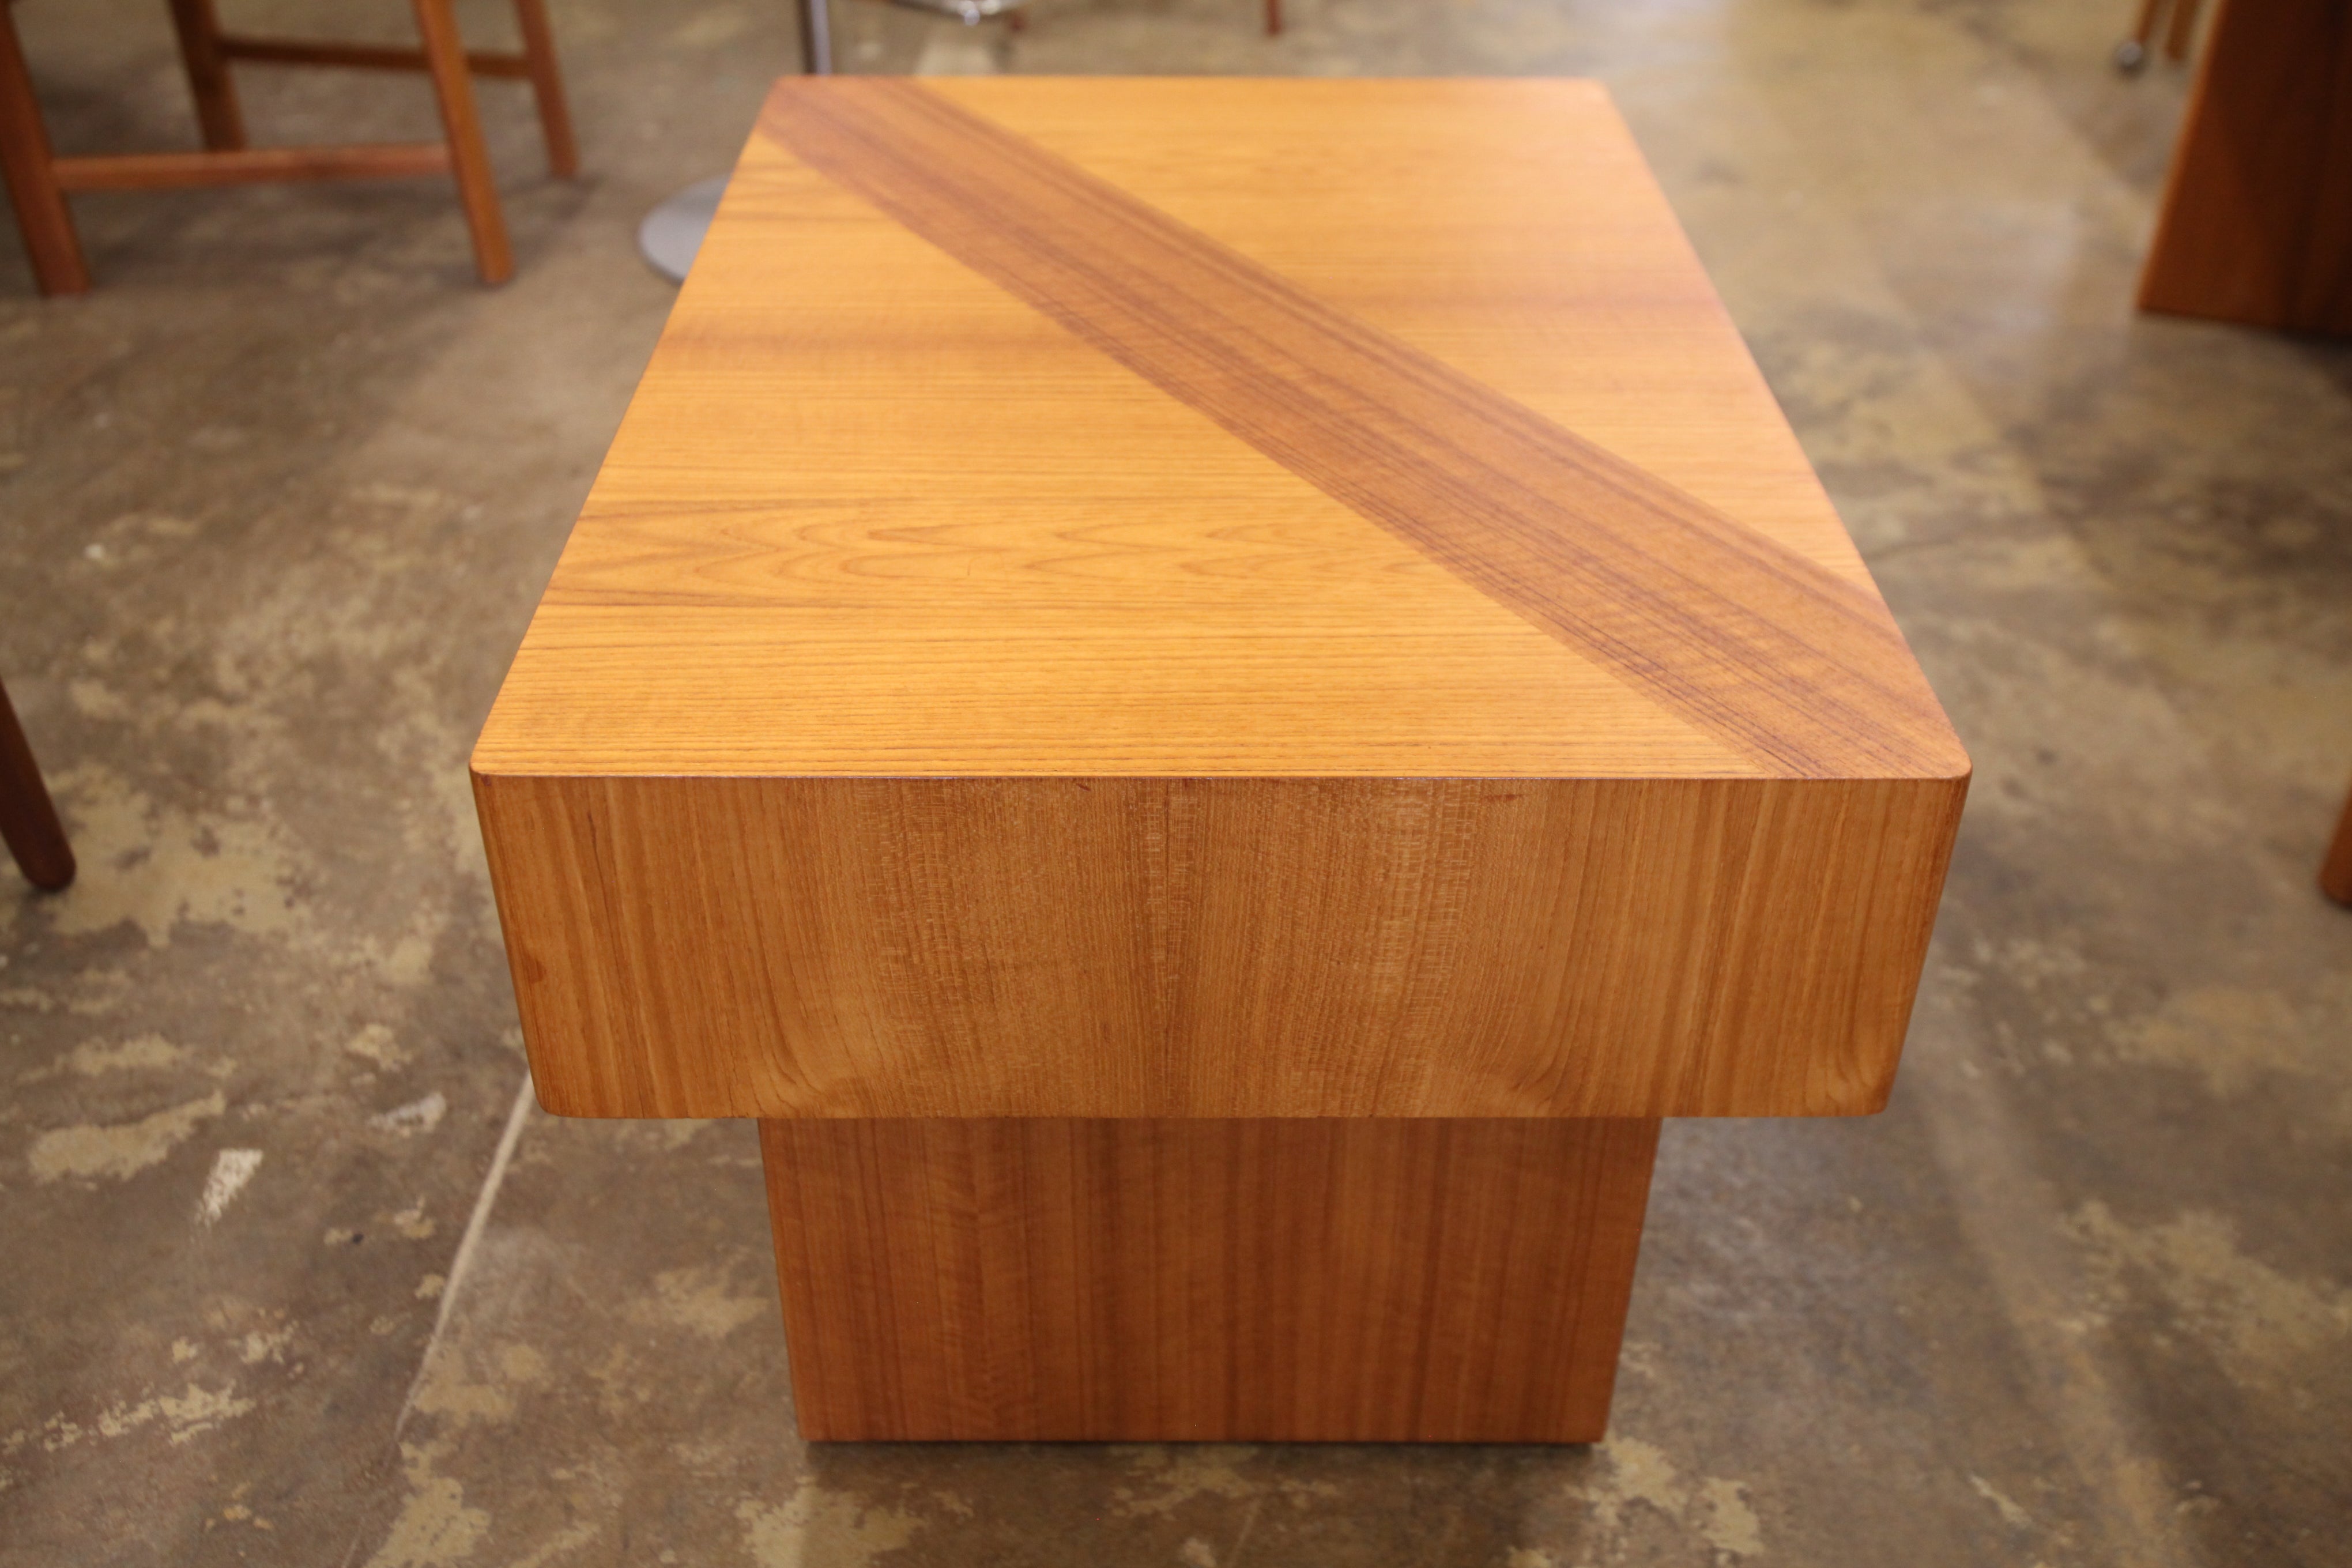 Vintage Teak Side Table by RS Associates Montreal (30" x 20" x 17.5"H)